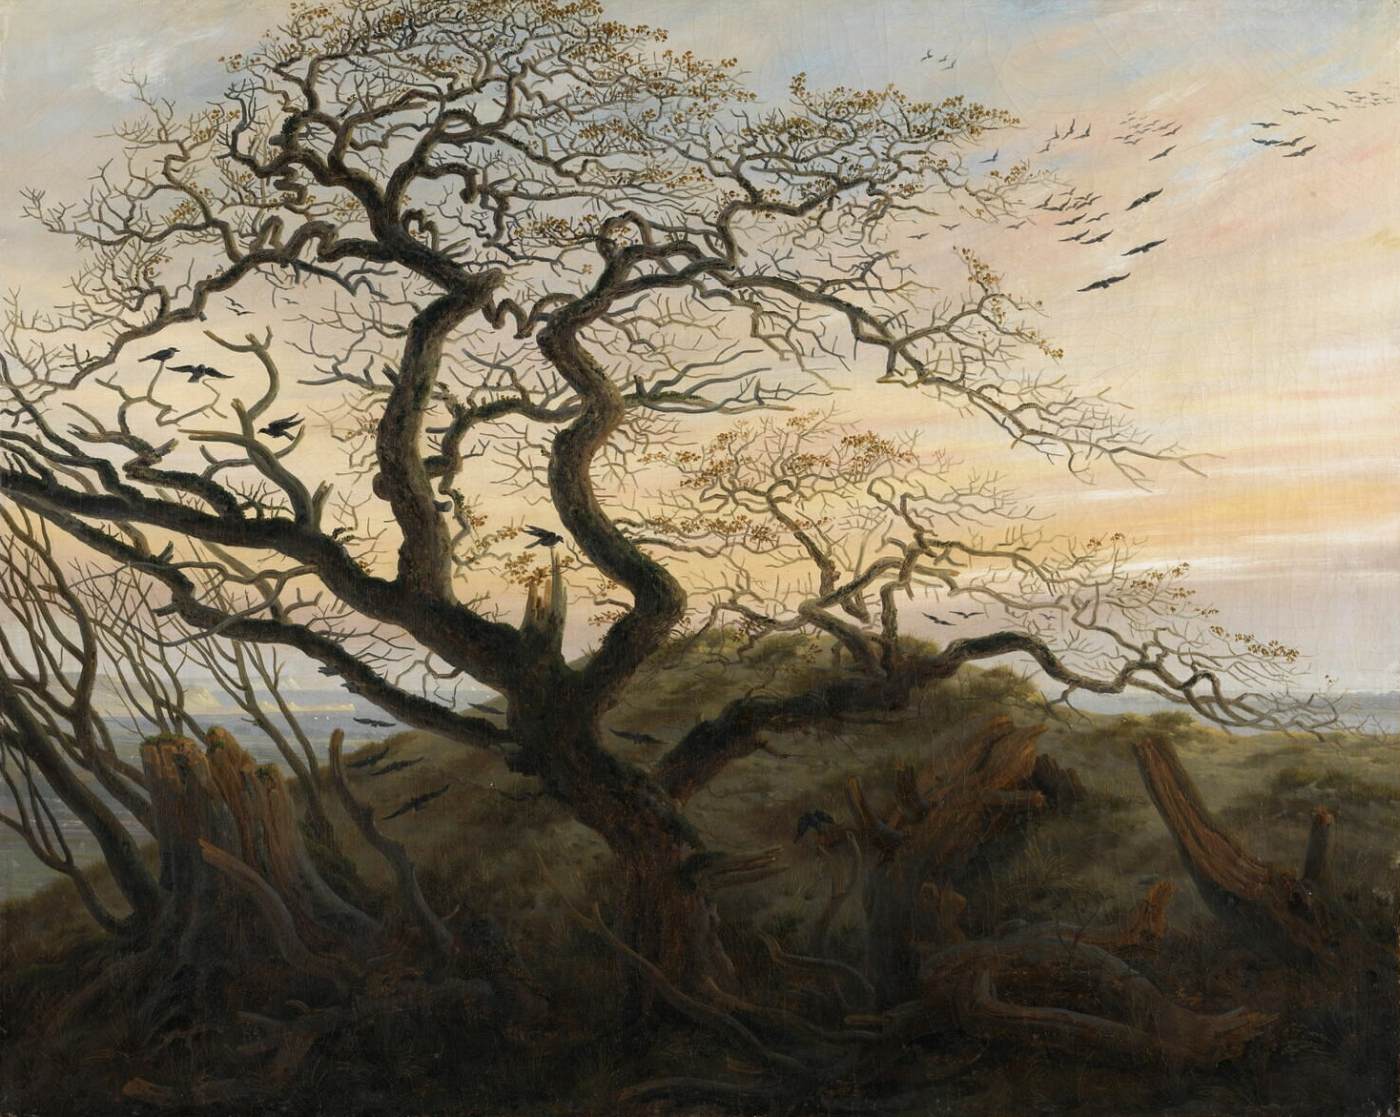 The Tree of the Ravens